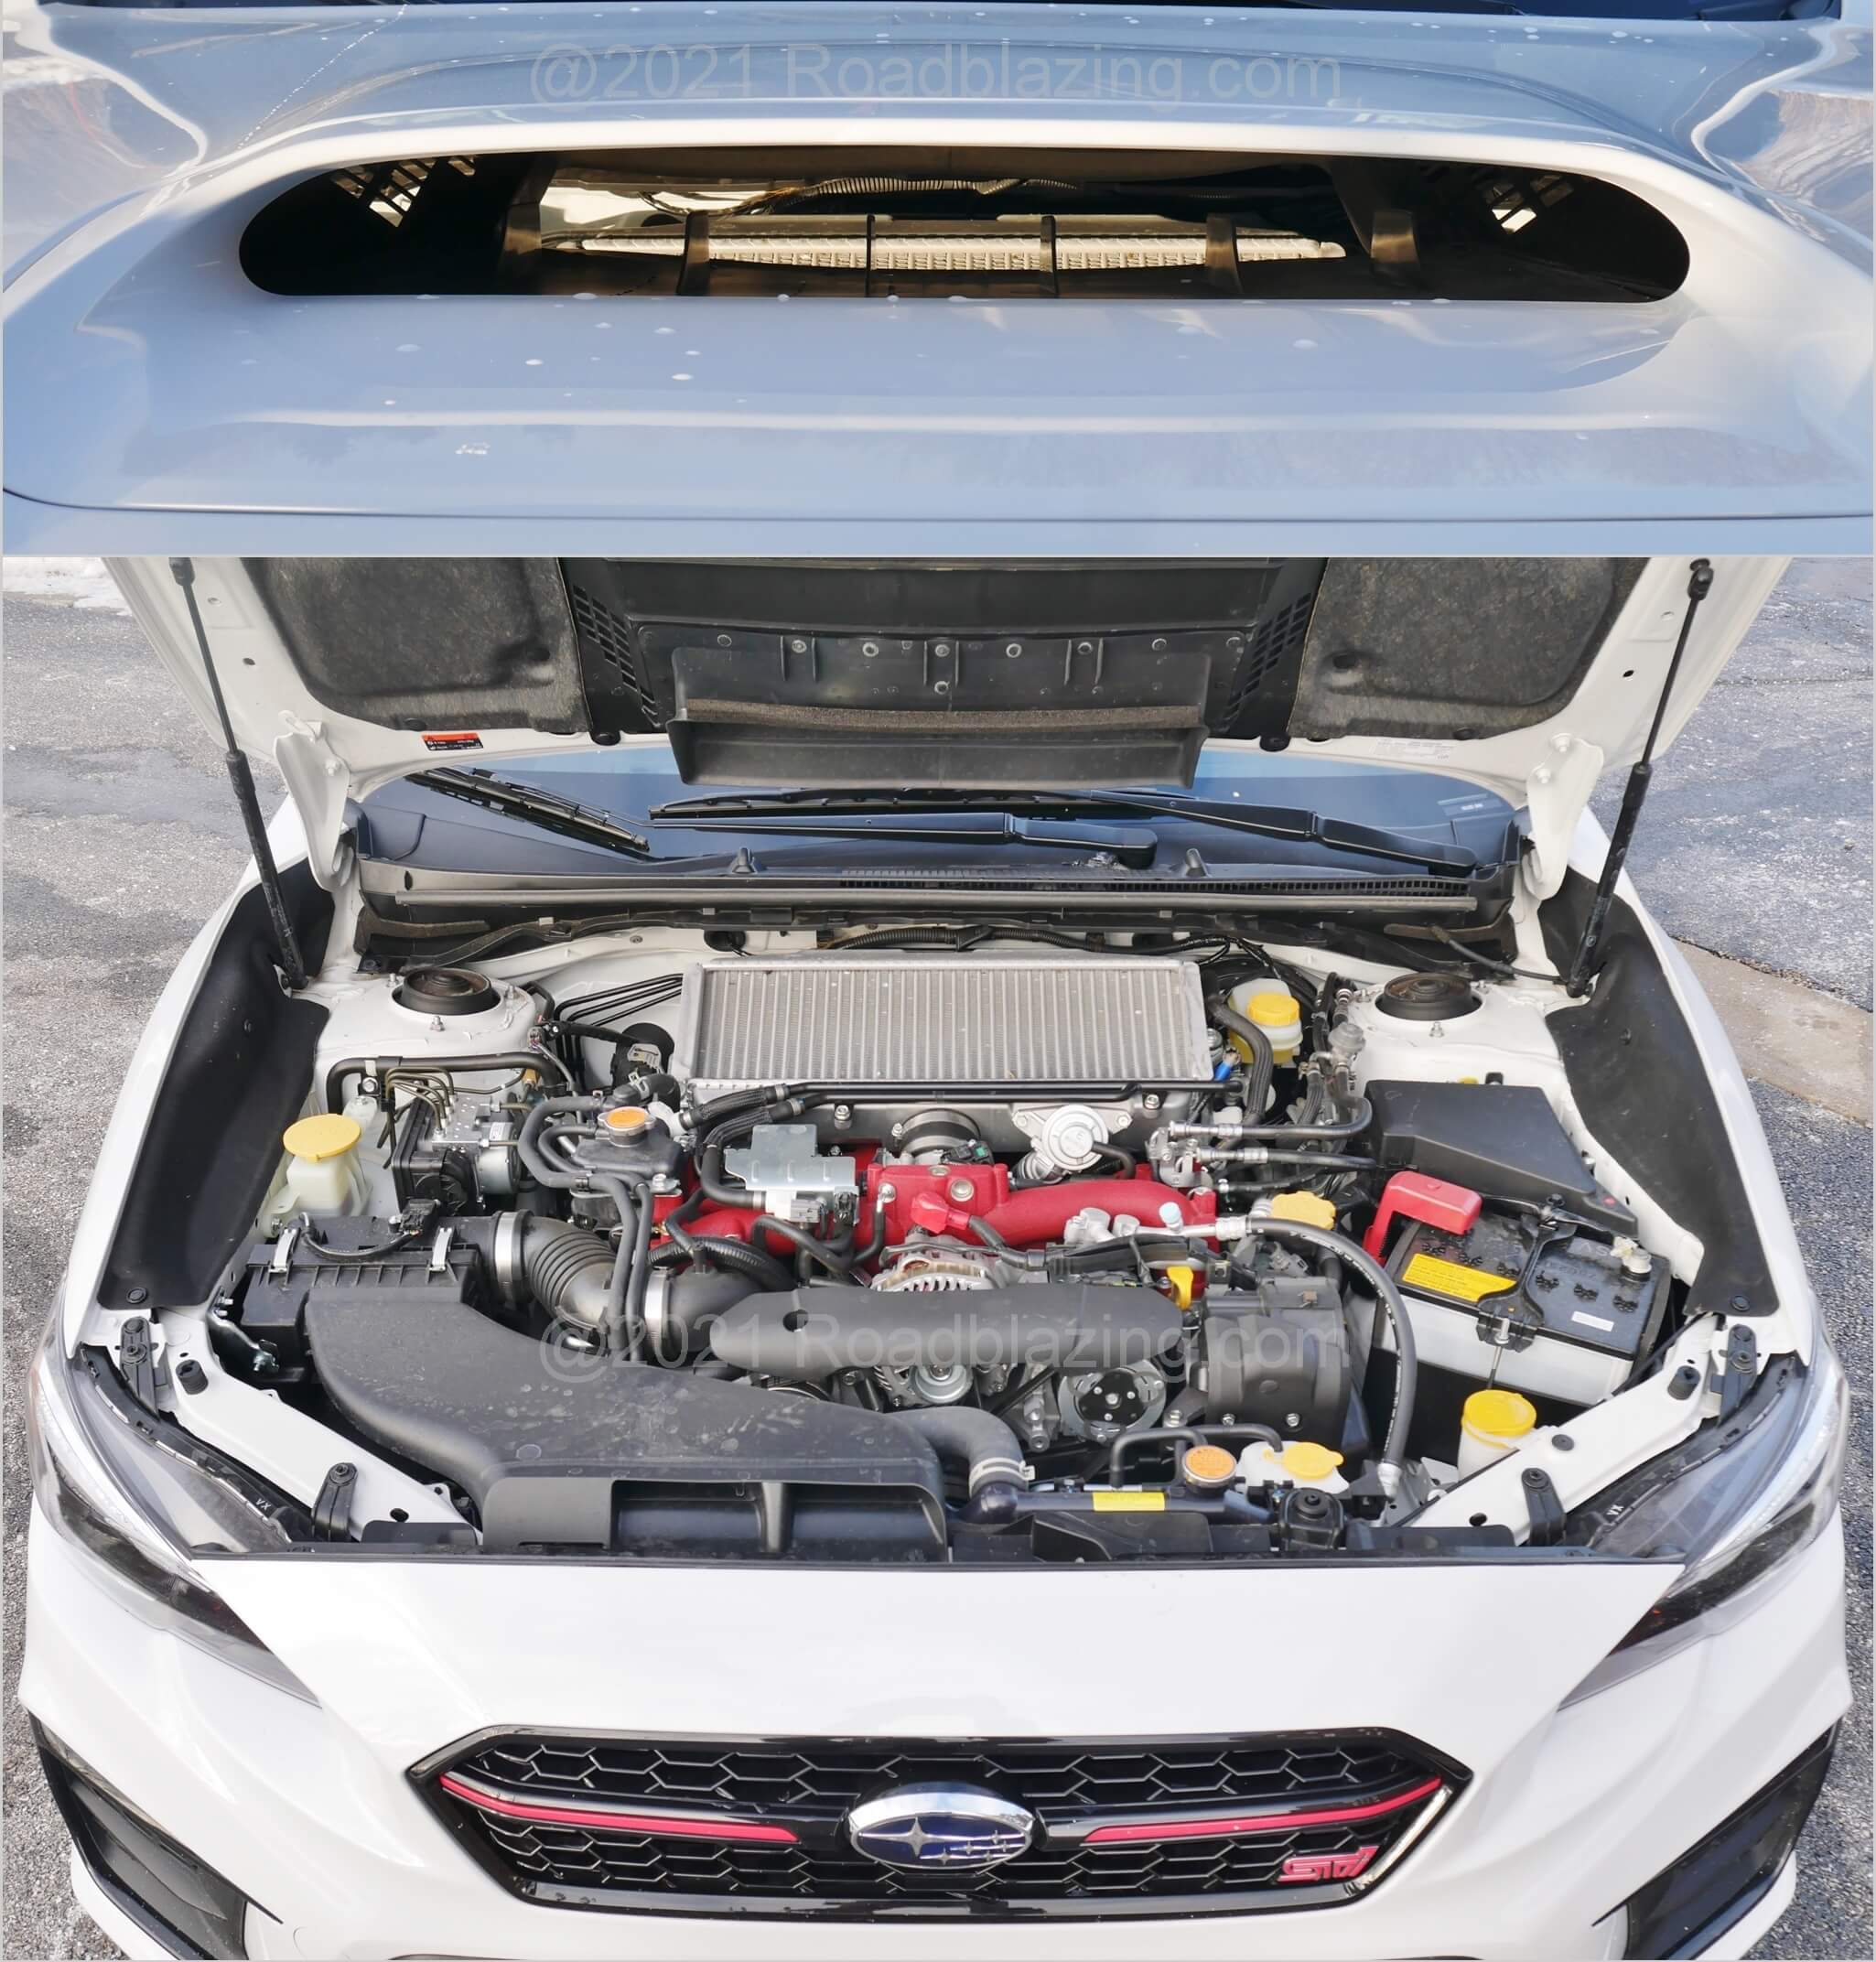 2020 Subaru WRX STI: large NACA hood duct jams cool air into huge air-to-air intercooler. IHI VF-48 twin scroll turbocharger makes 16.2 psi boost on 91 octane unleaded